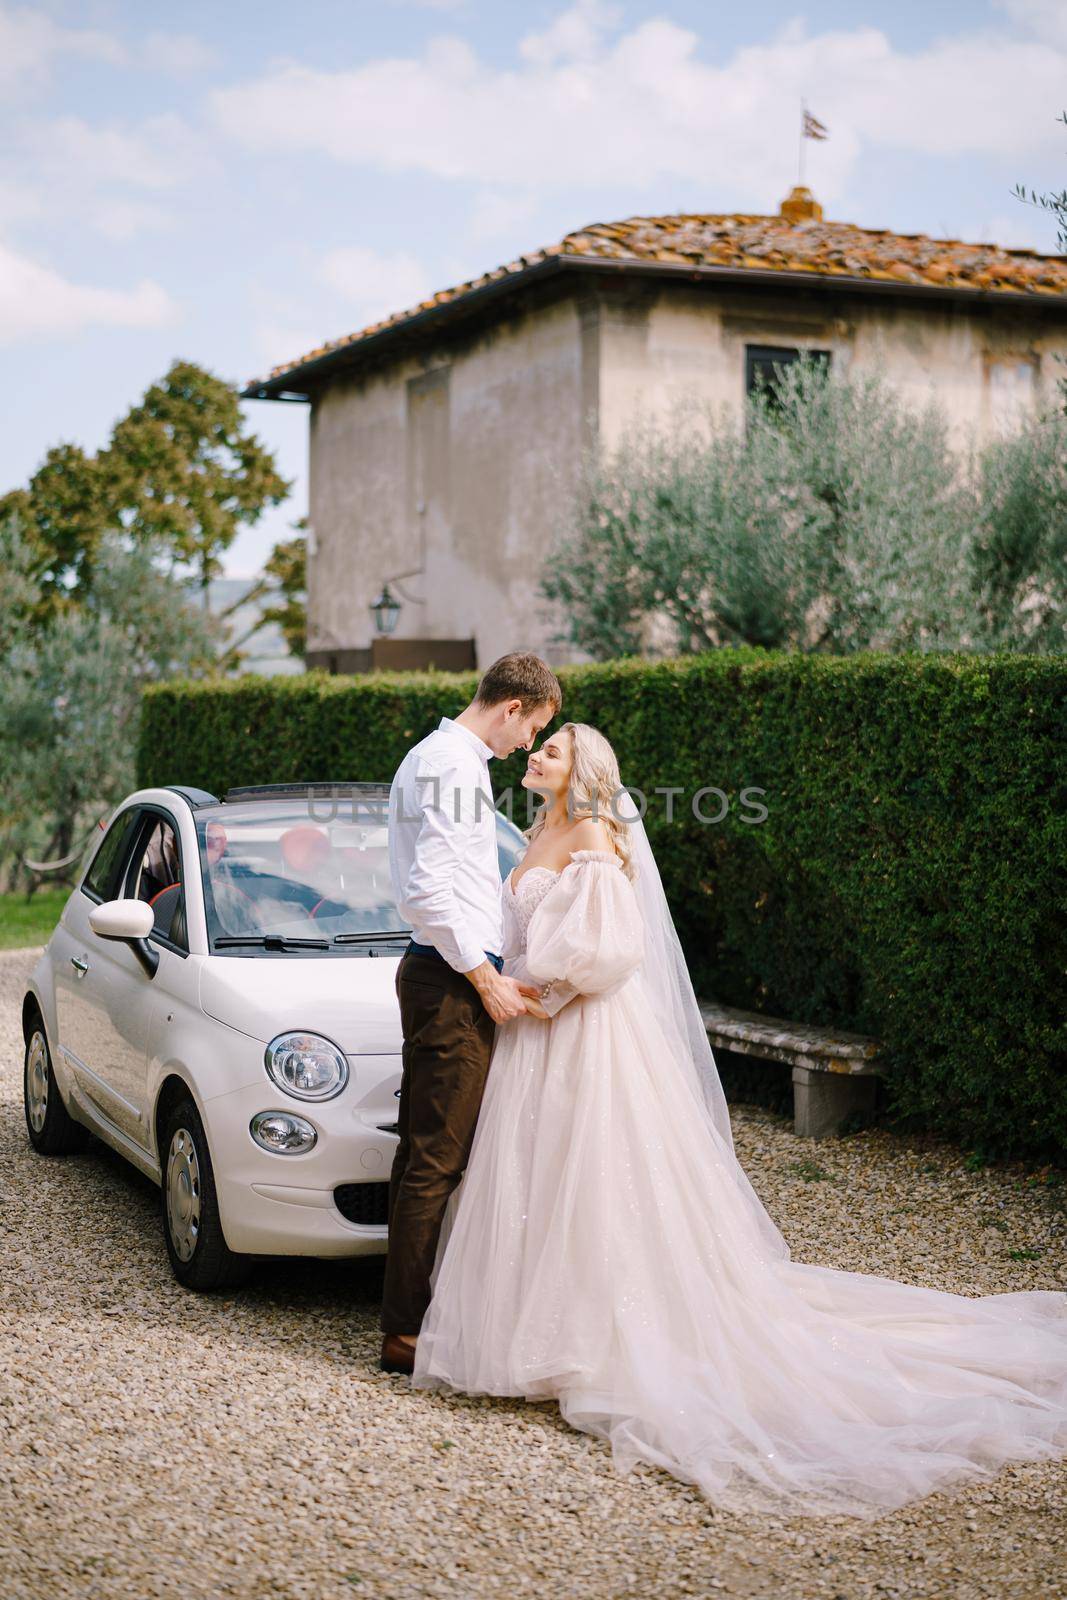 Beautiful bride and groom looking at each other and holding hands in front of a convertible at the Villa in Tuscany, Italy by Nadtochiy